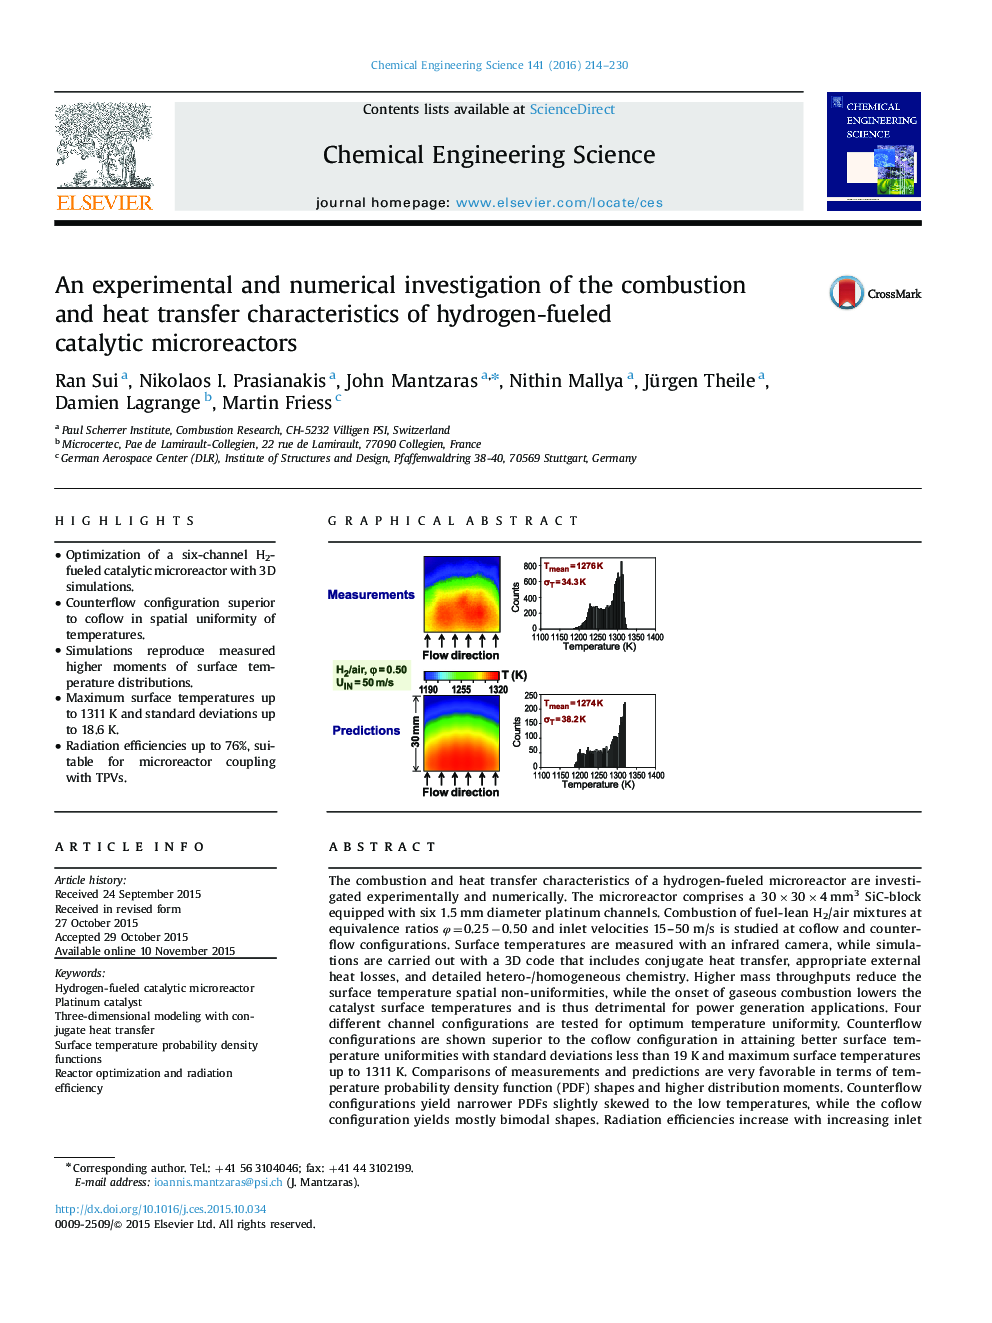 An experimental and numerical investigation of the combustion and heat transfer characteristics of hydrogen-fueled catalytic microreactors